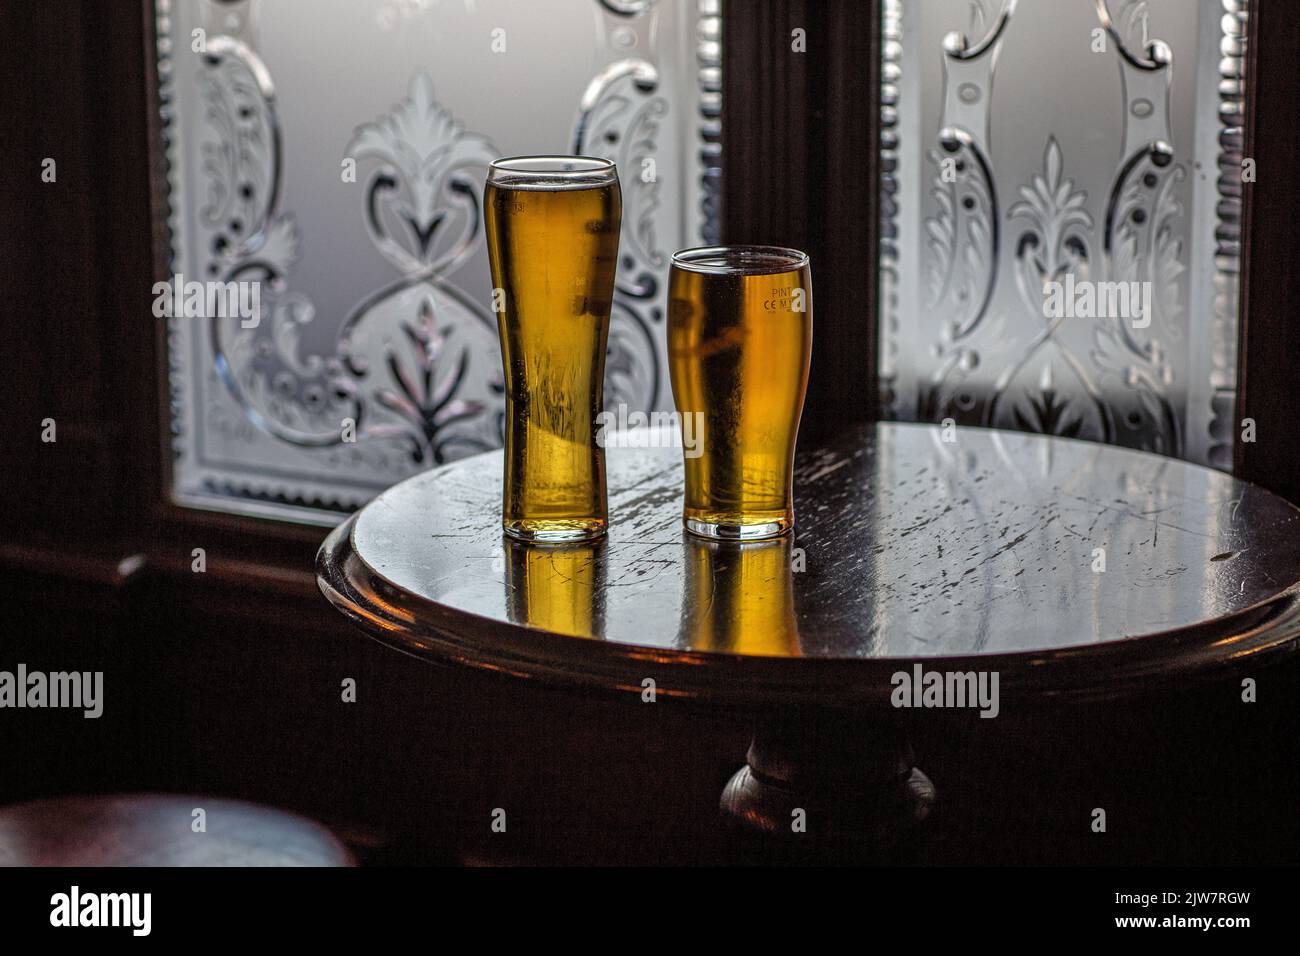 Beer glasses on a pub table Stock Photo